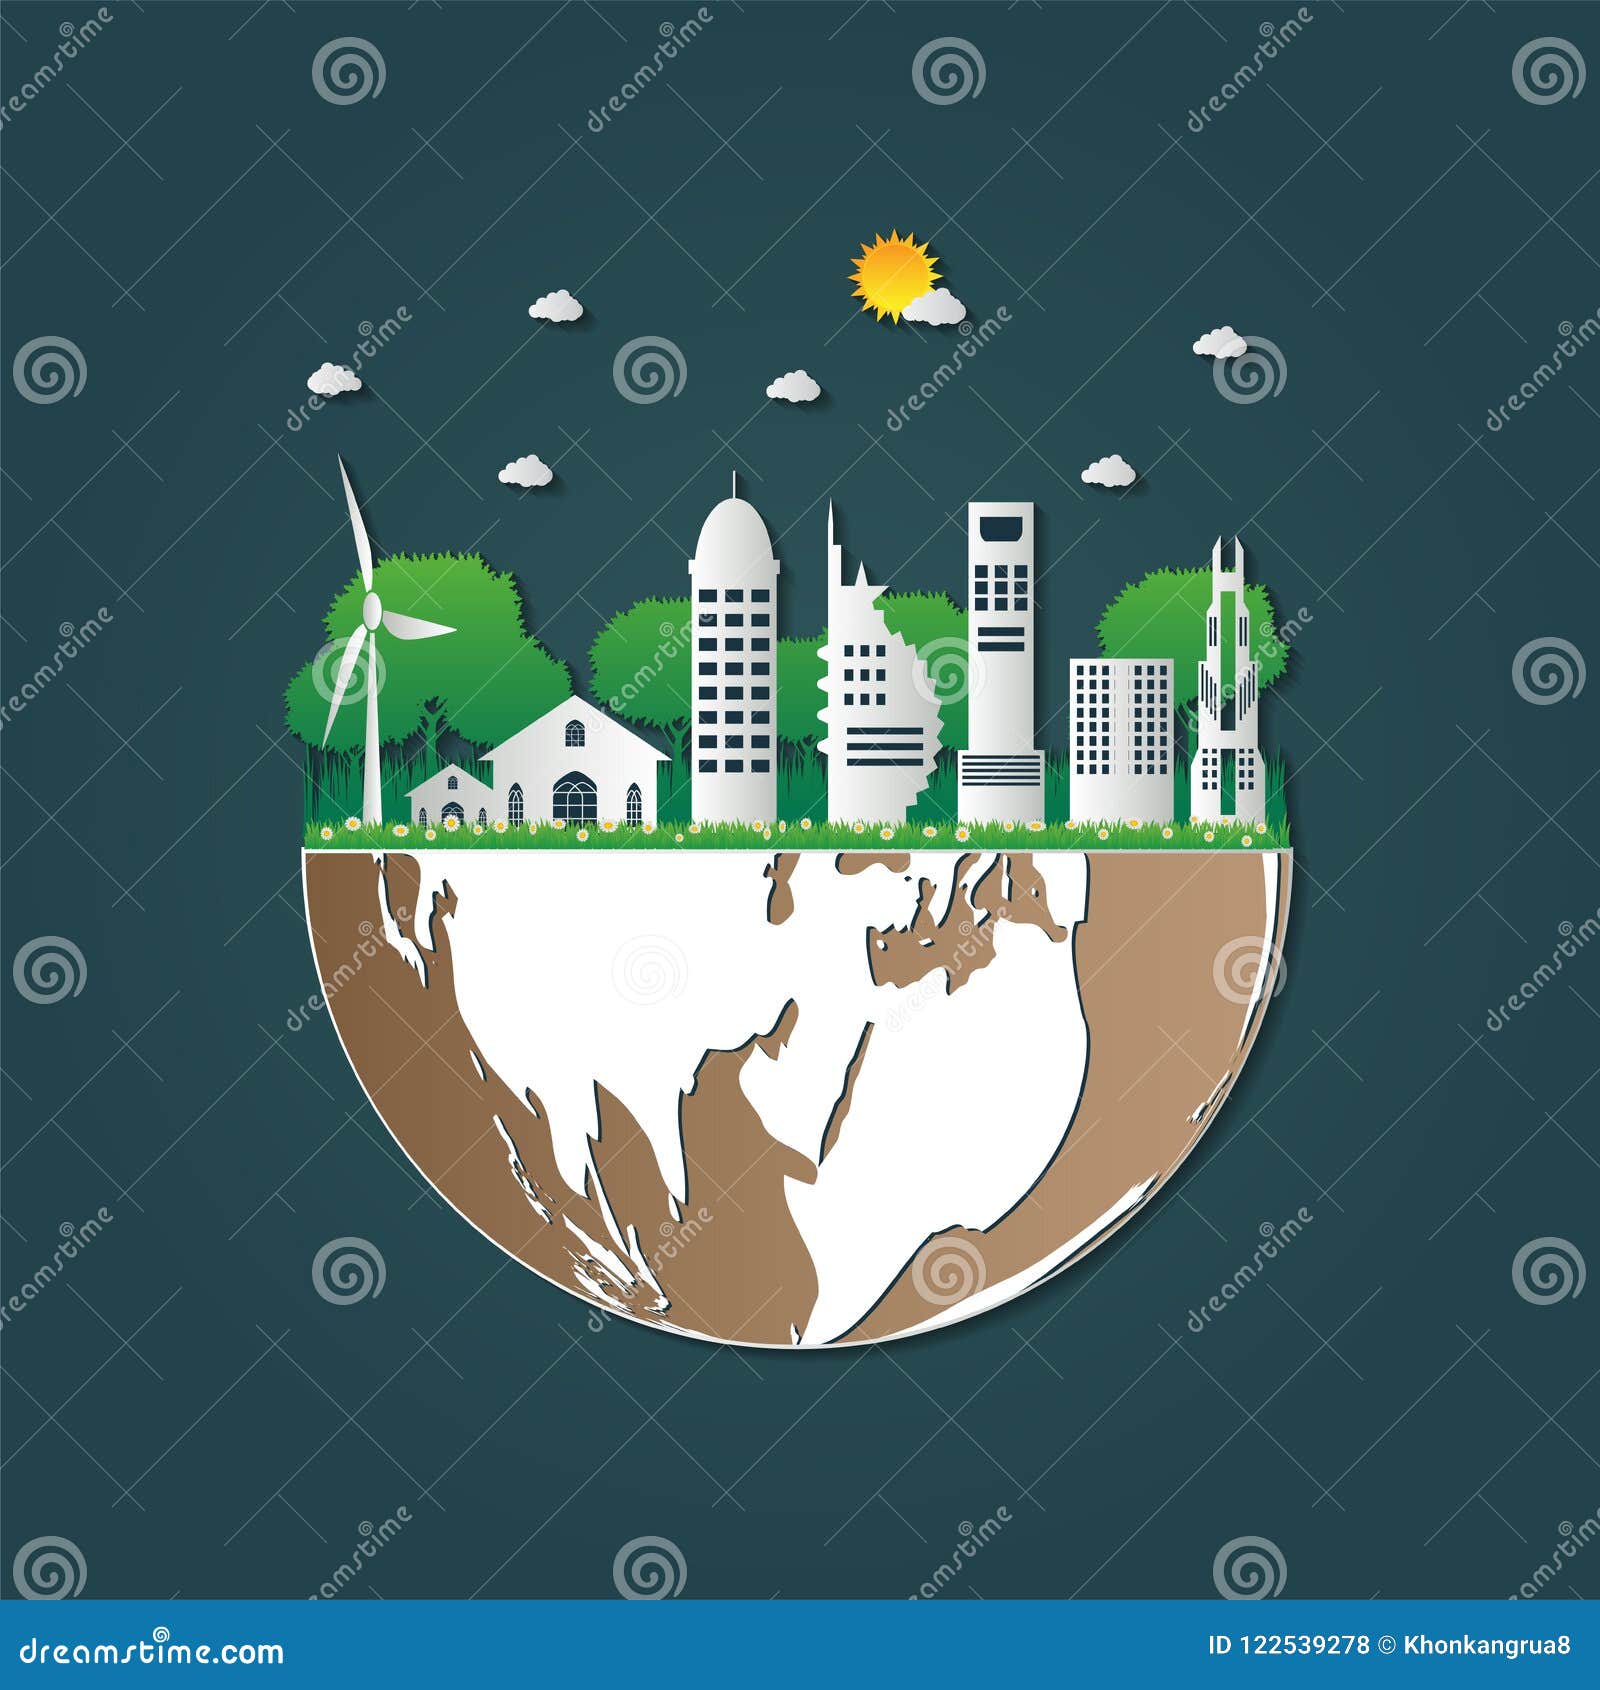 building ecology.green cities help the world with eco-friendly concept ideas. 